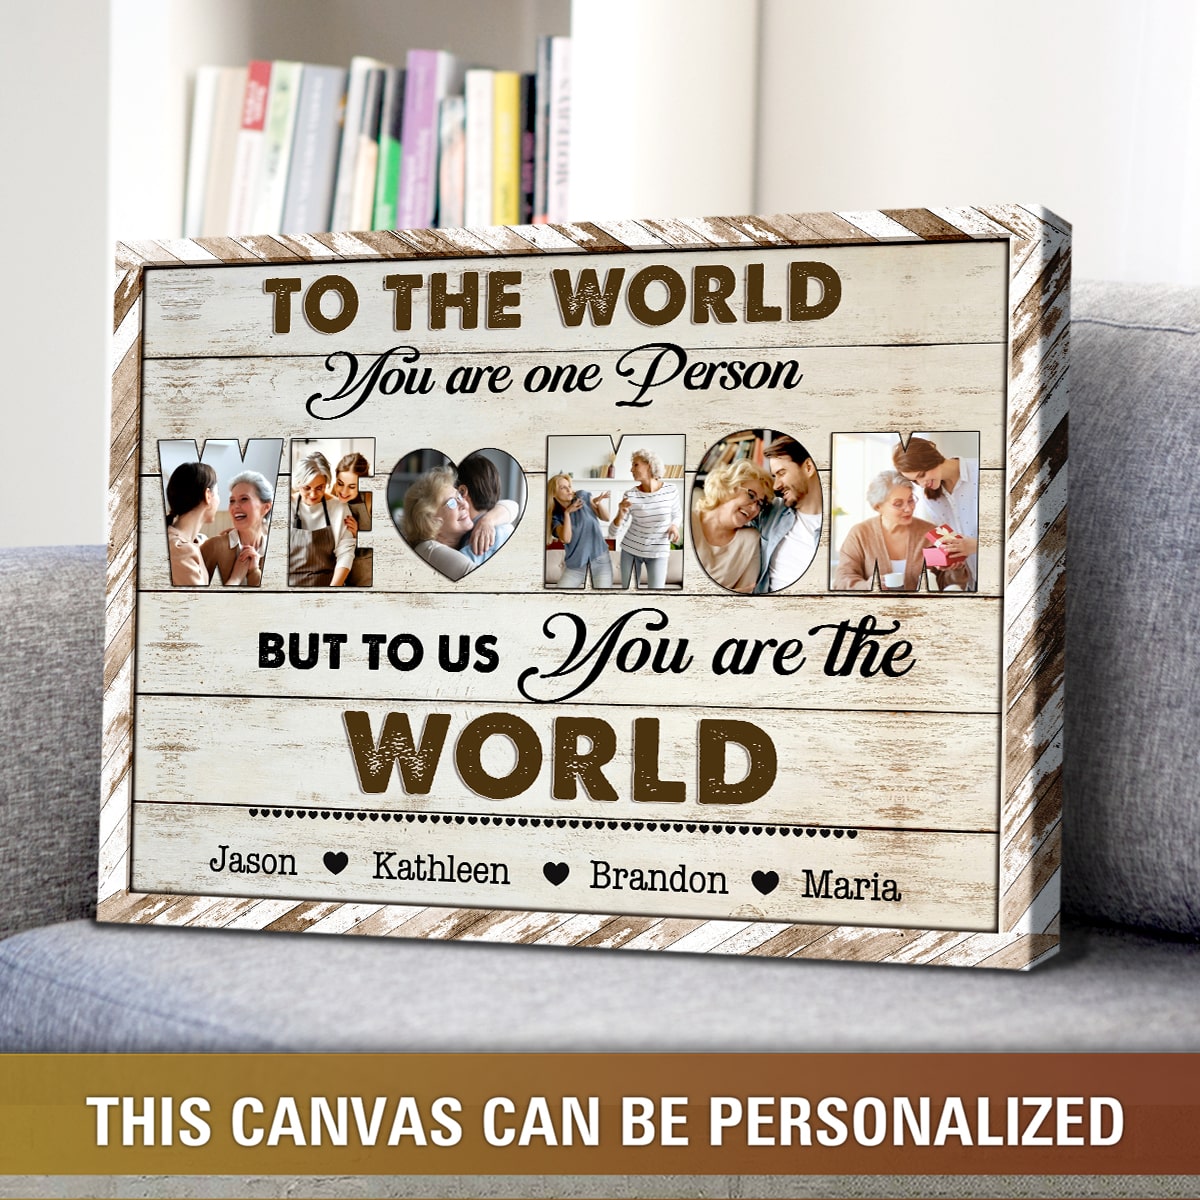 https://images.ohcanvas.com/ohcanvas_com/2022/08/19005231/birthday-gift-for-mom-christmas-gift-family-canvas-for-mom-you-are-the-world01.jpg